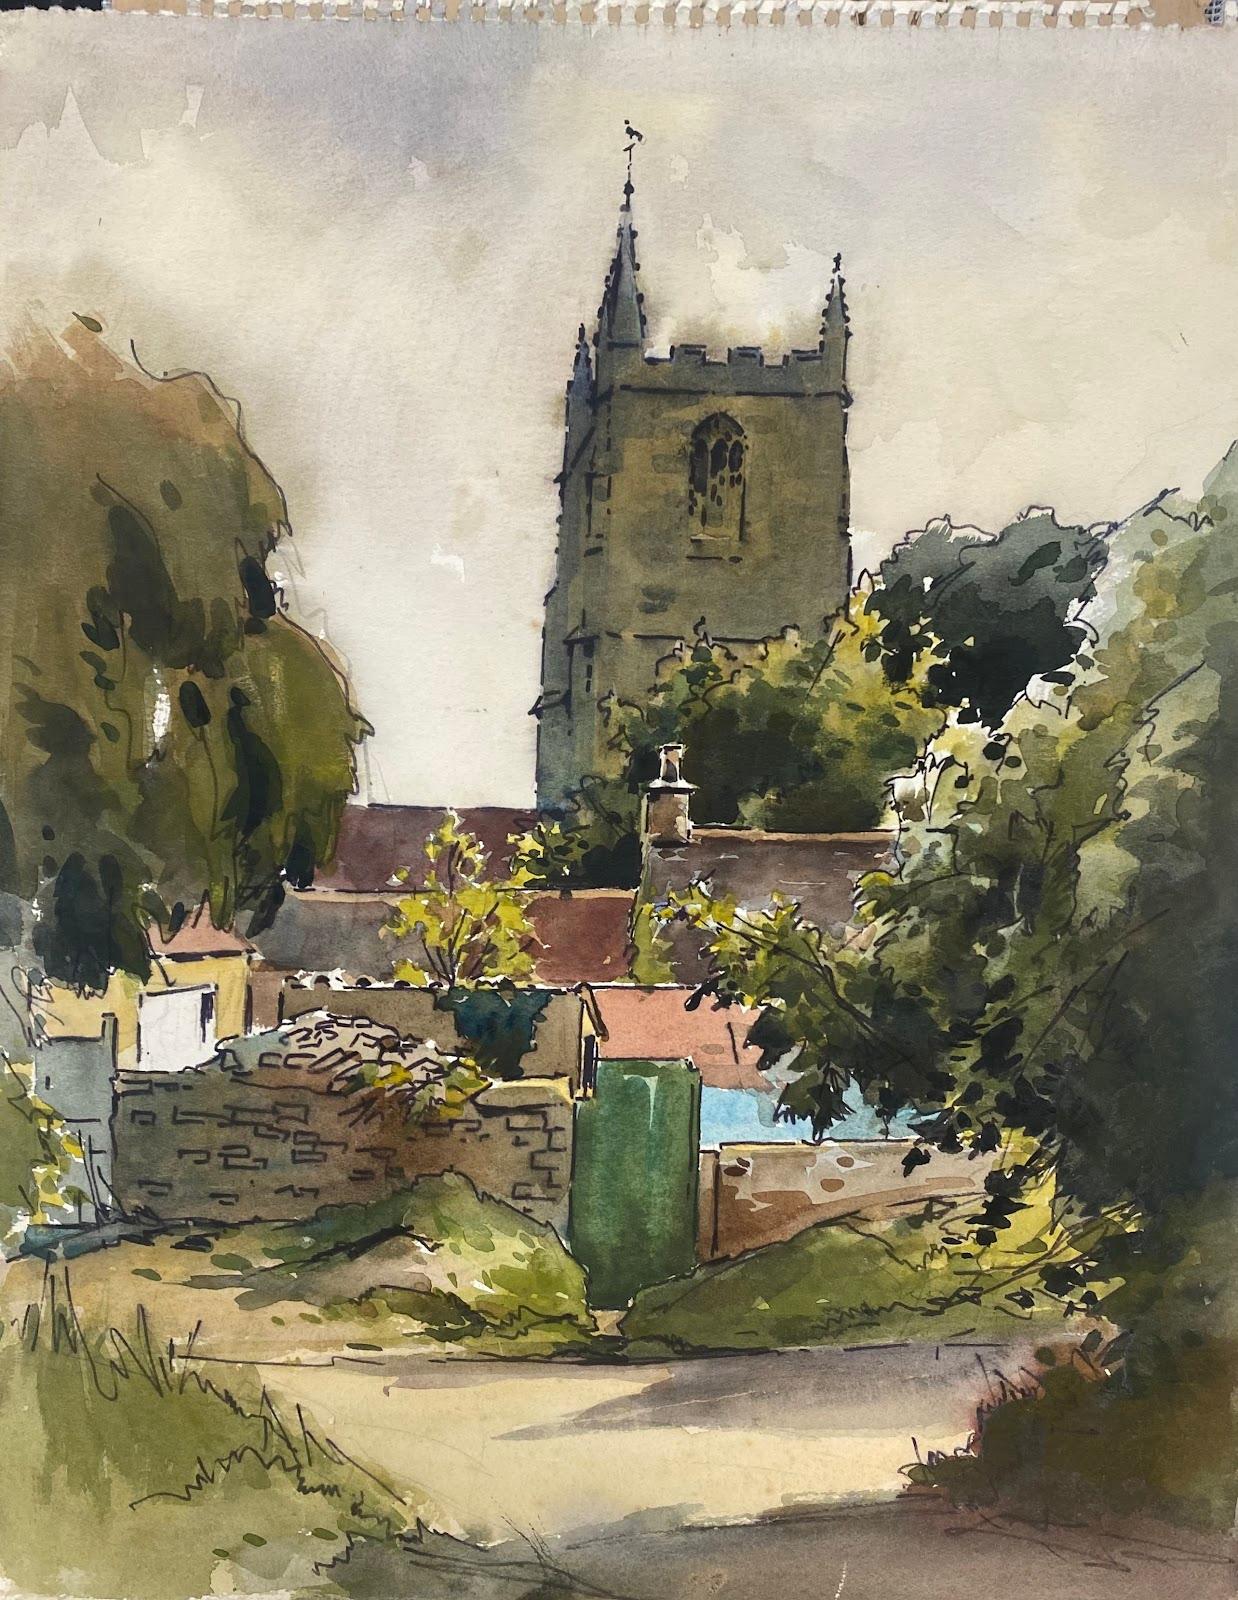 Frank Duffield (British, 1908-1982)
original watercolour painting on board, unframed
size: 19.75 x 15.75 inches
condition: overall very good, minor wear to the edges as is normal for an unframed work, minor staining from age/ light to the